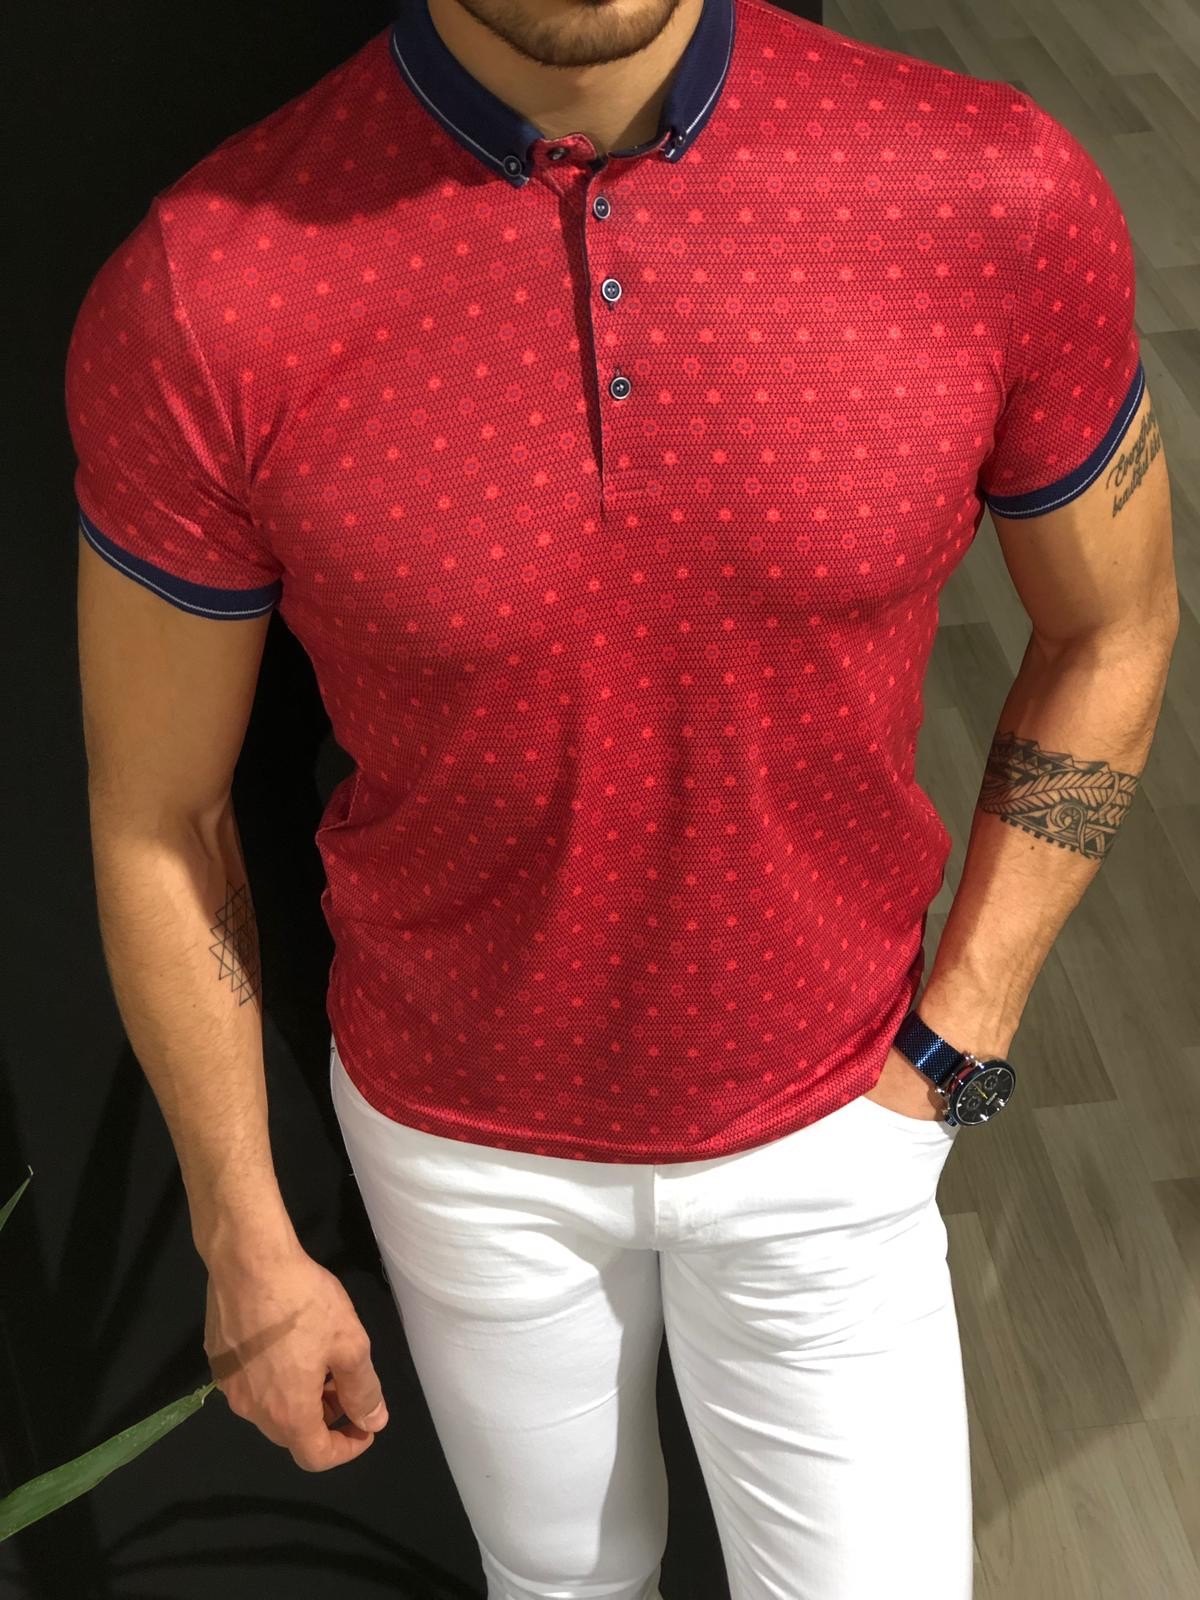 red t shirt with collar